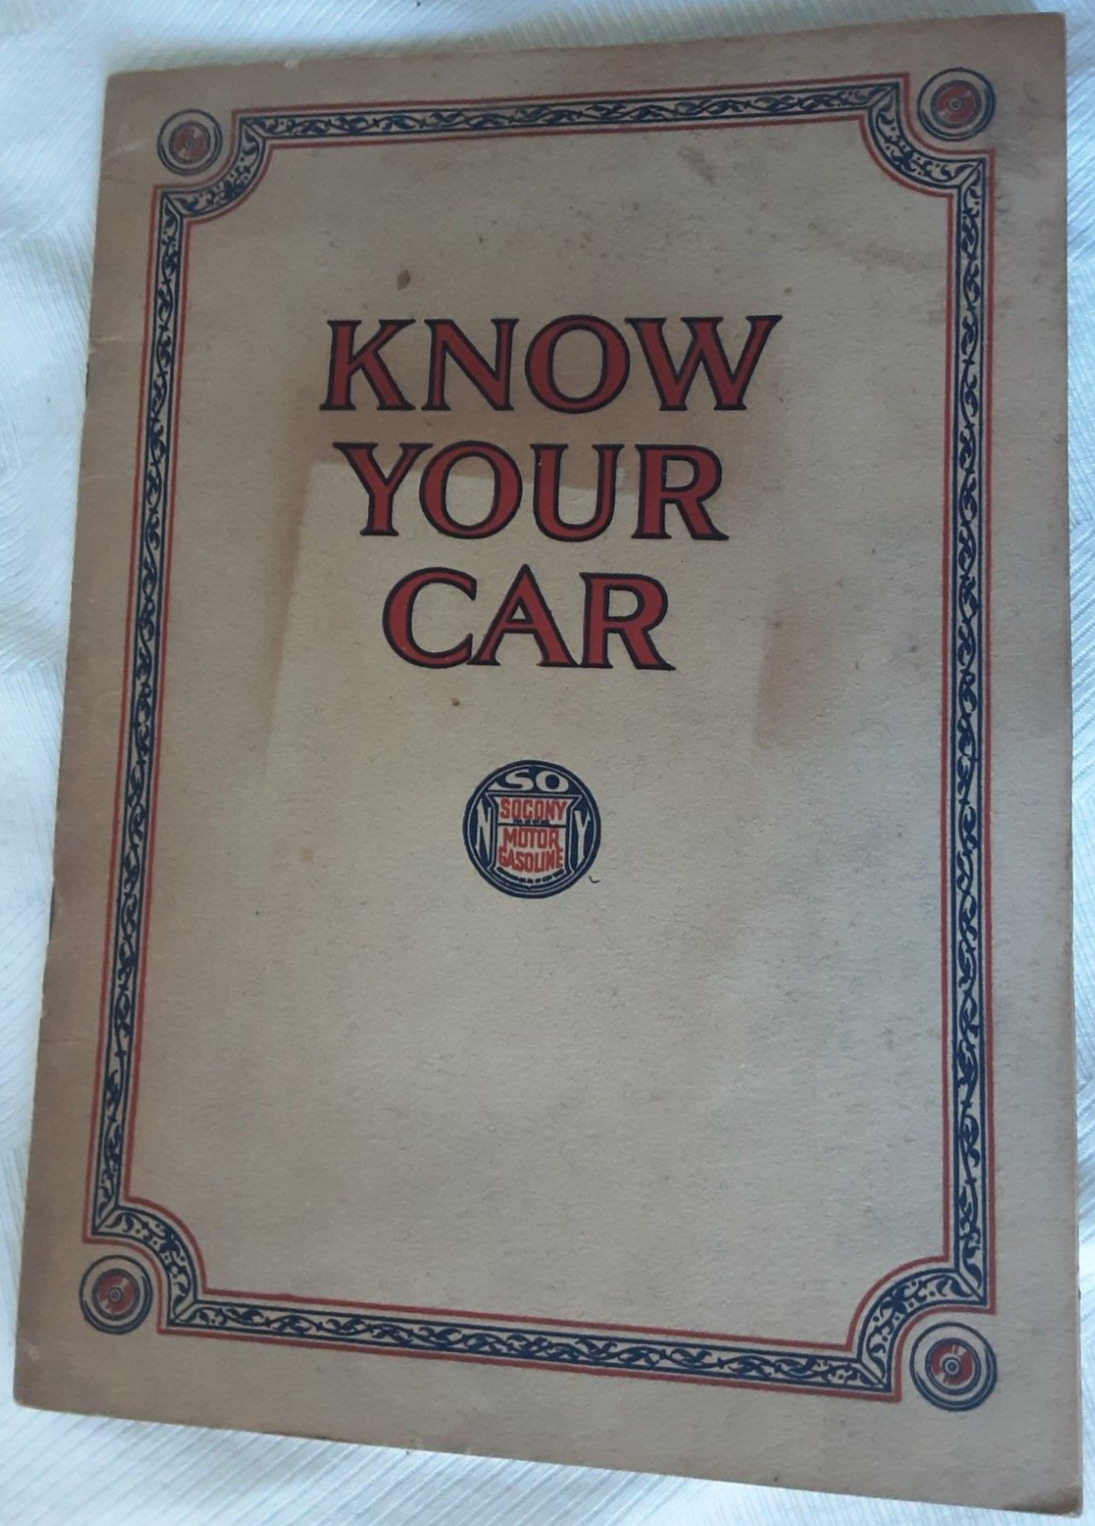 Socony Standard Oil 1928 \'Know Your Car\' Booklet | Antique Gas Collectible